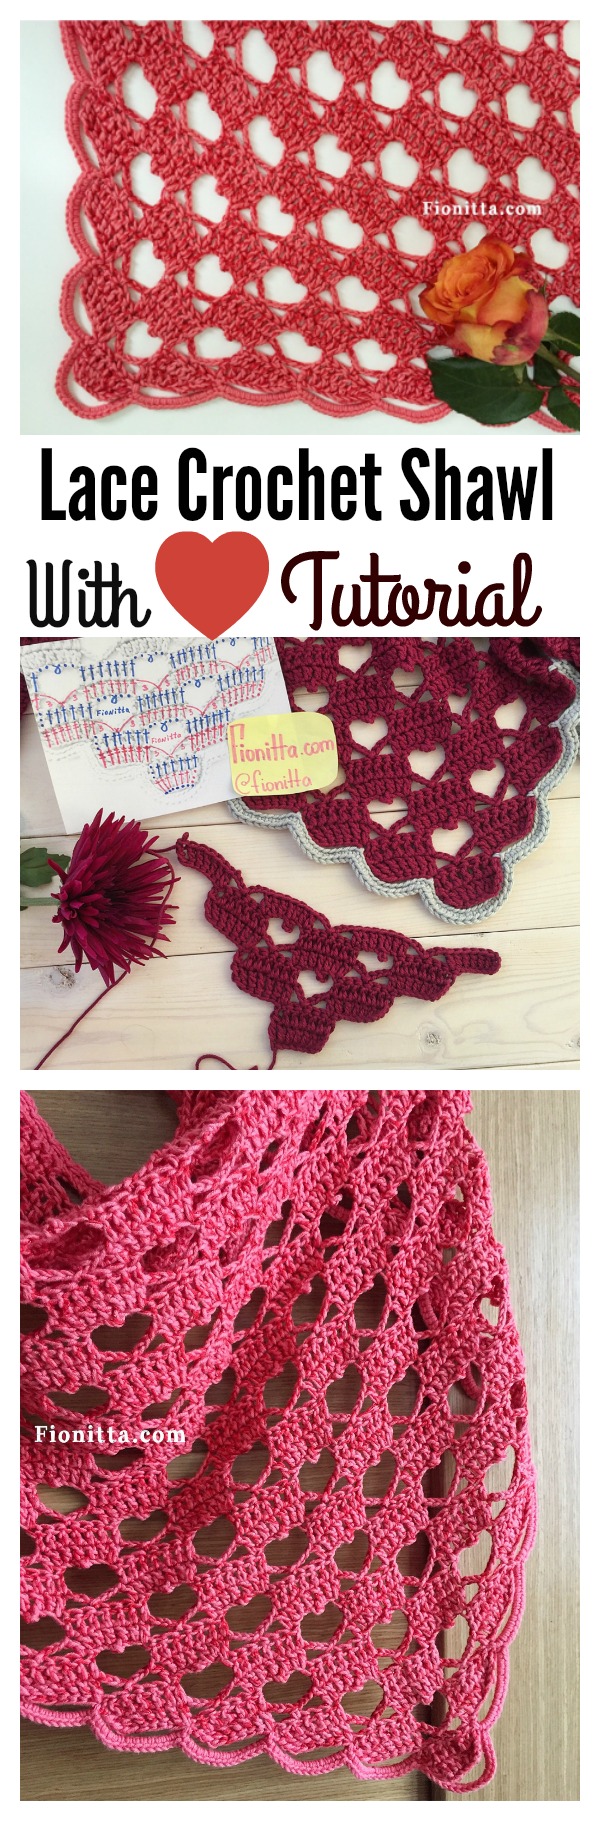 Lacy Crochet Shawl with Hearts Video Tutorial